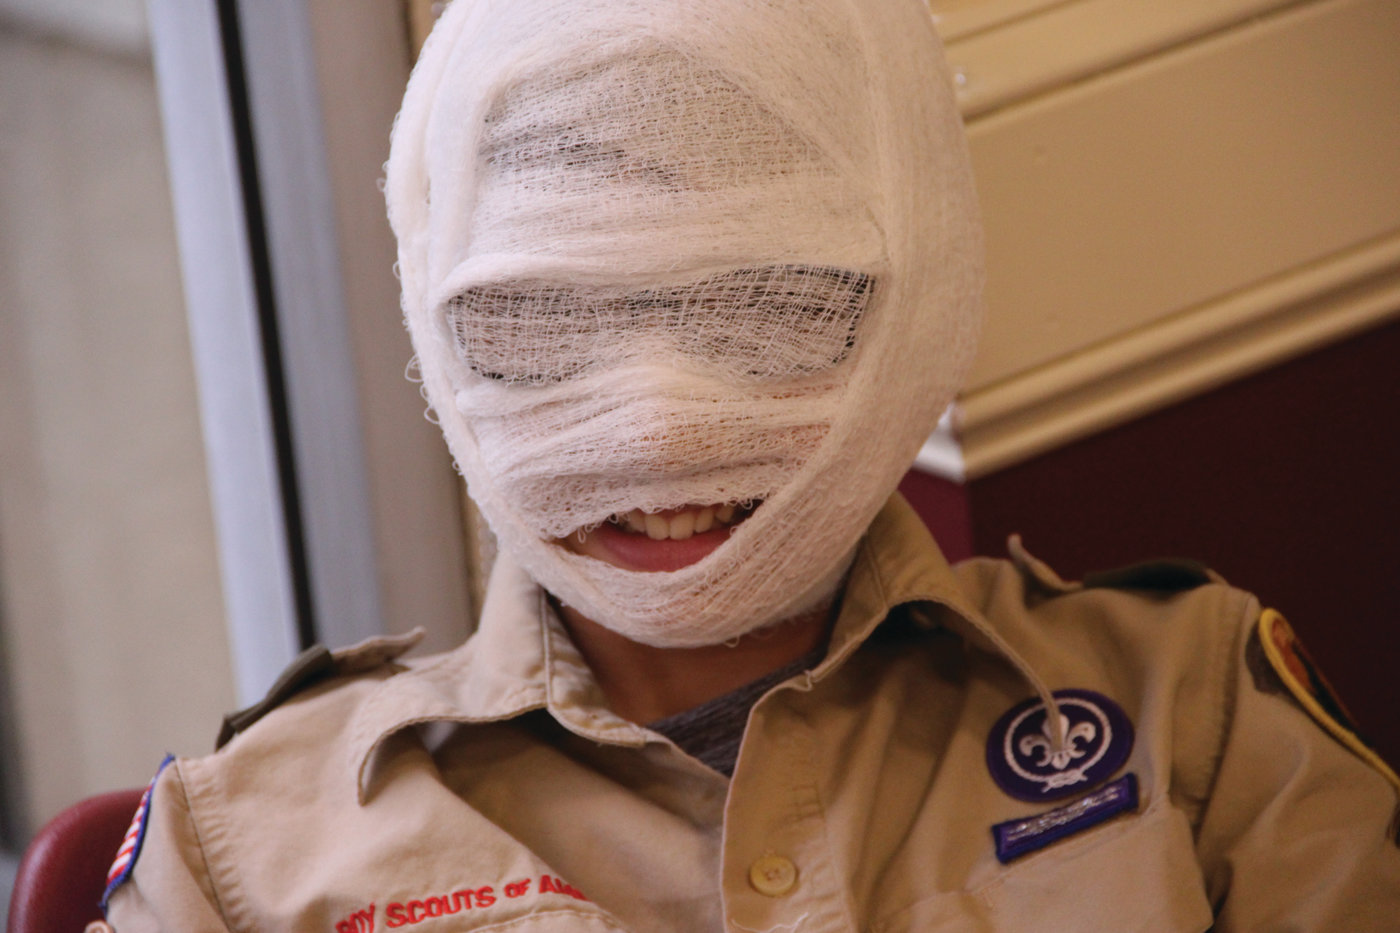 WRAPPED UP: One of the scouts in the first aid class (we couldn’t identify him) couldn’t resist using gauze for a cause